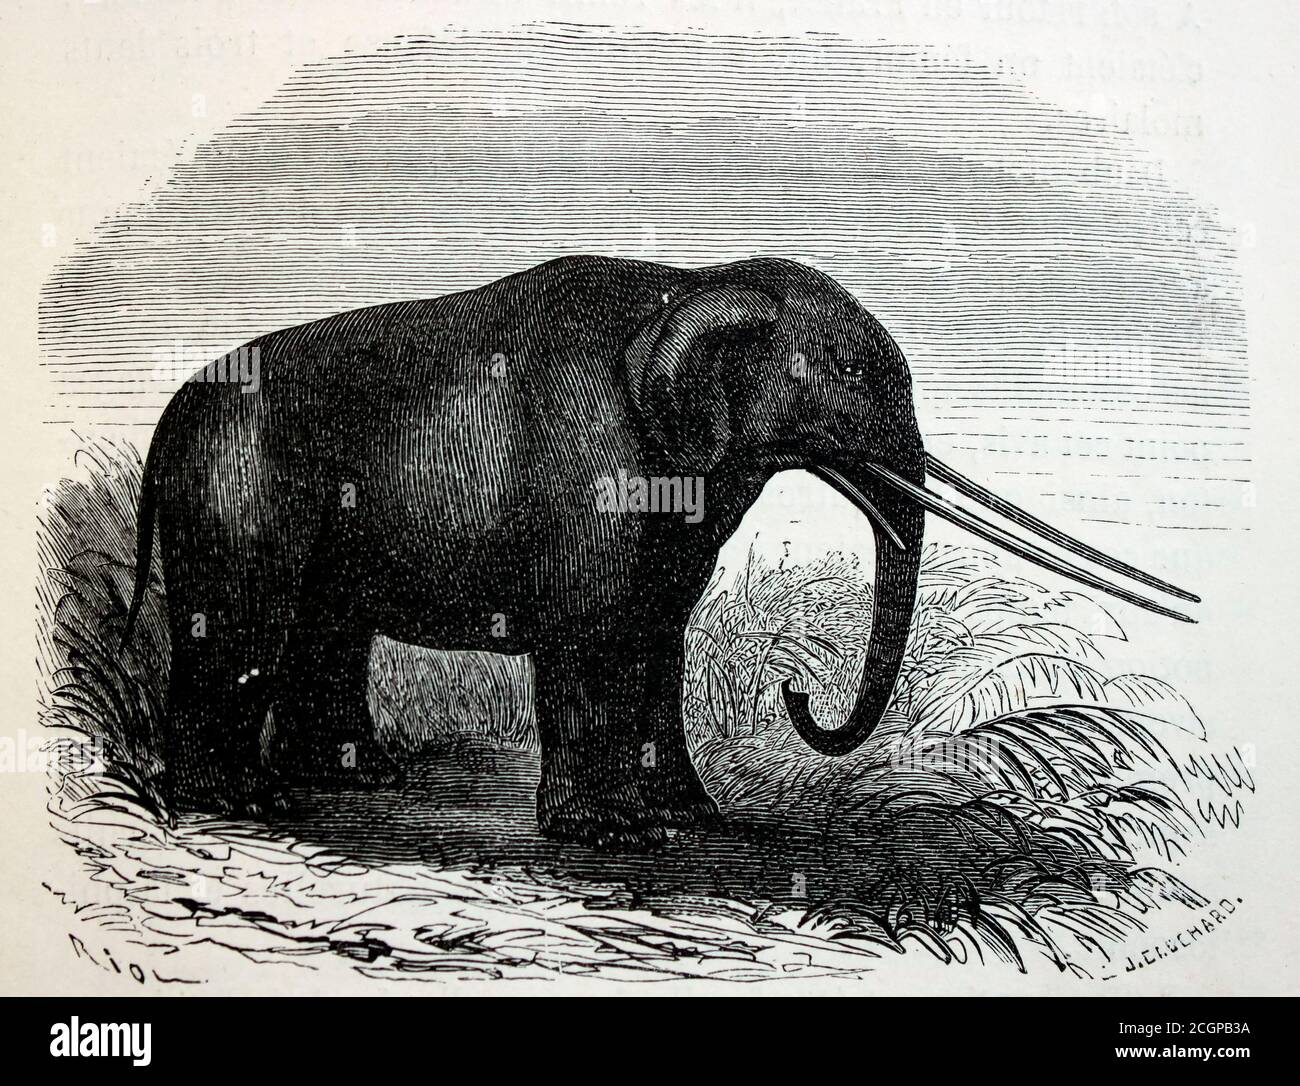 Illustration of a mastodon (Mastodon giganteus, now known as Mammut americanum), a pachyderm that lived in North America from the late Miocene to the Pleistocene, from Louis Figuier's The World Before the Deluge, 1867 American edition. Stock Photo